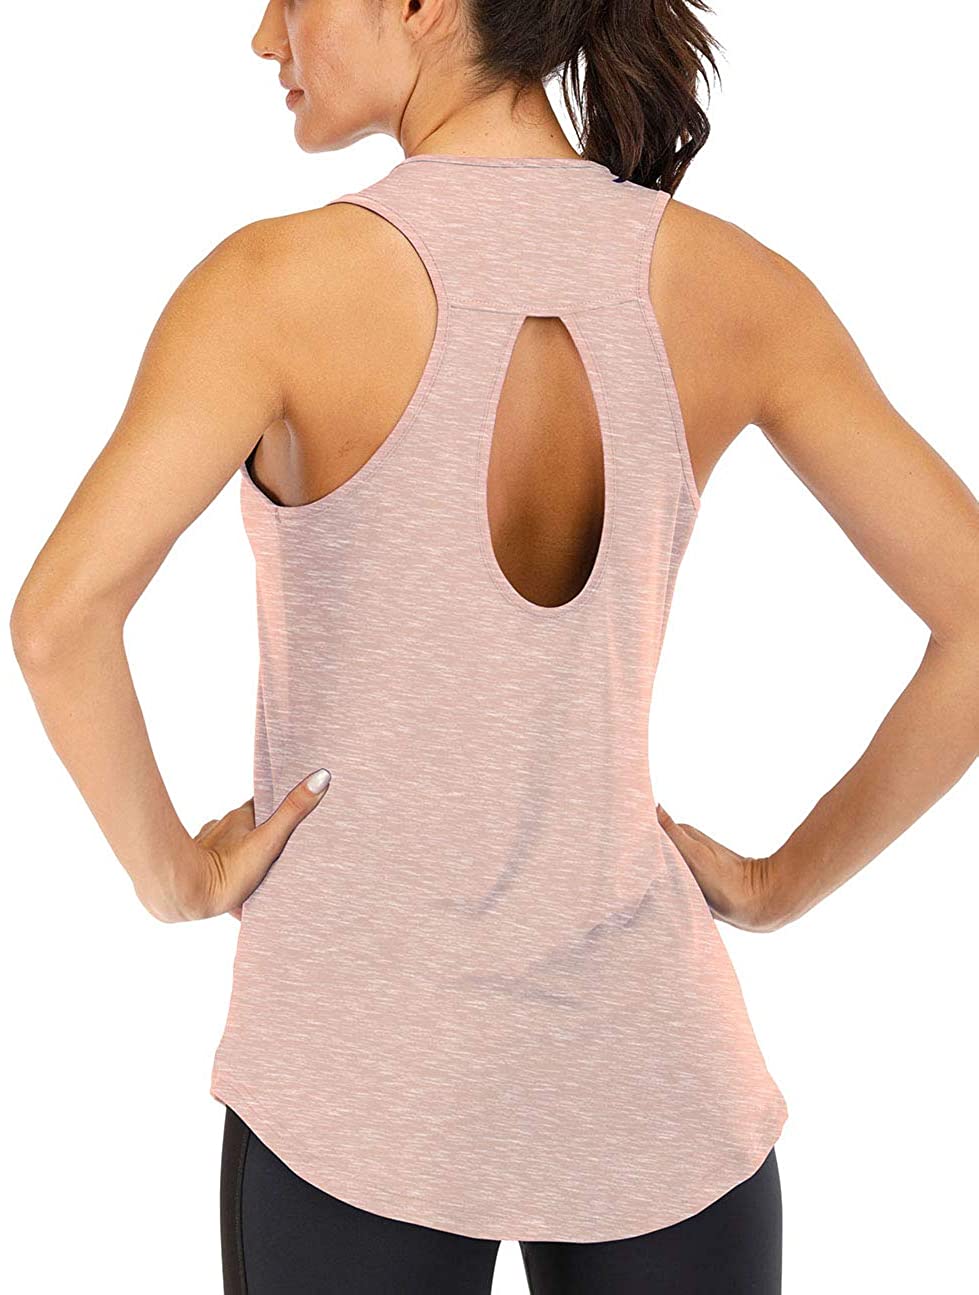 ICTIVE Workout Tank Tops for Women Yoga Shirts Backless Workout Tops for Women Running Tank Tops Sleeveless Muscle Tank Yoga Tops for Women Loose Fit Open Back Gym Tops Coral XL 